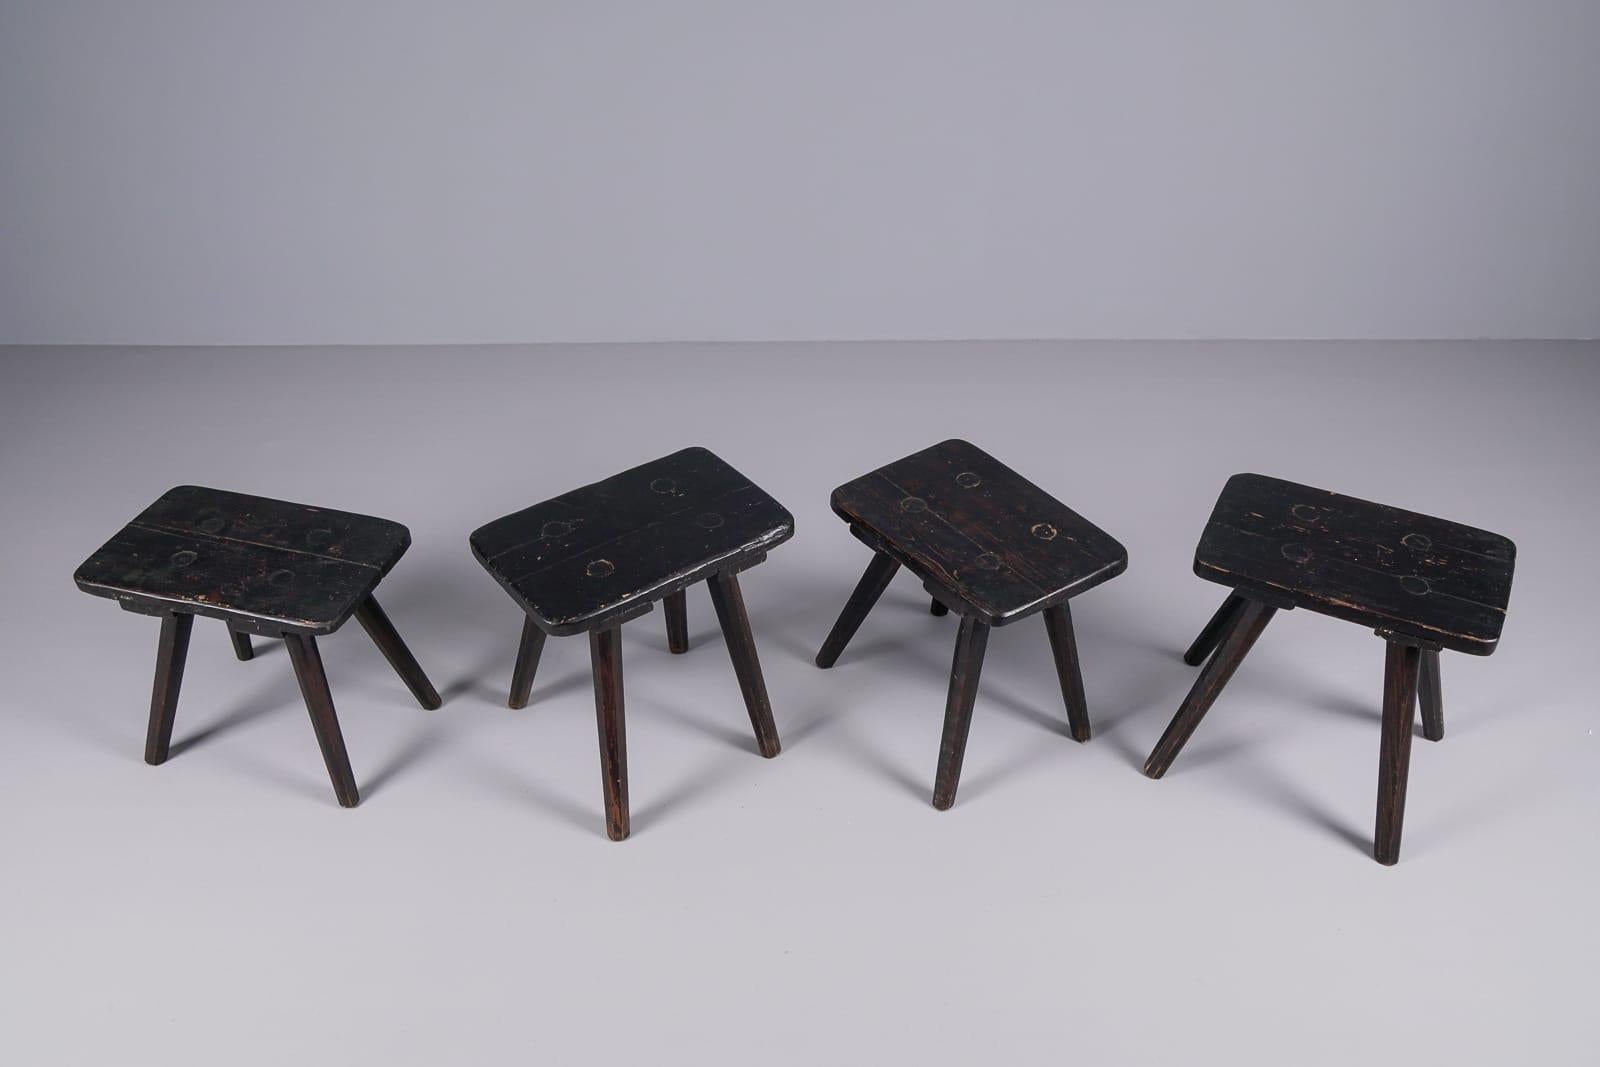 French Provincial Set of 4 Beautifully Shaped Old Wooden Stools, 1950s For Sale